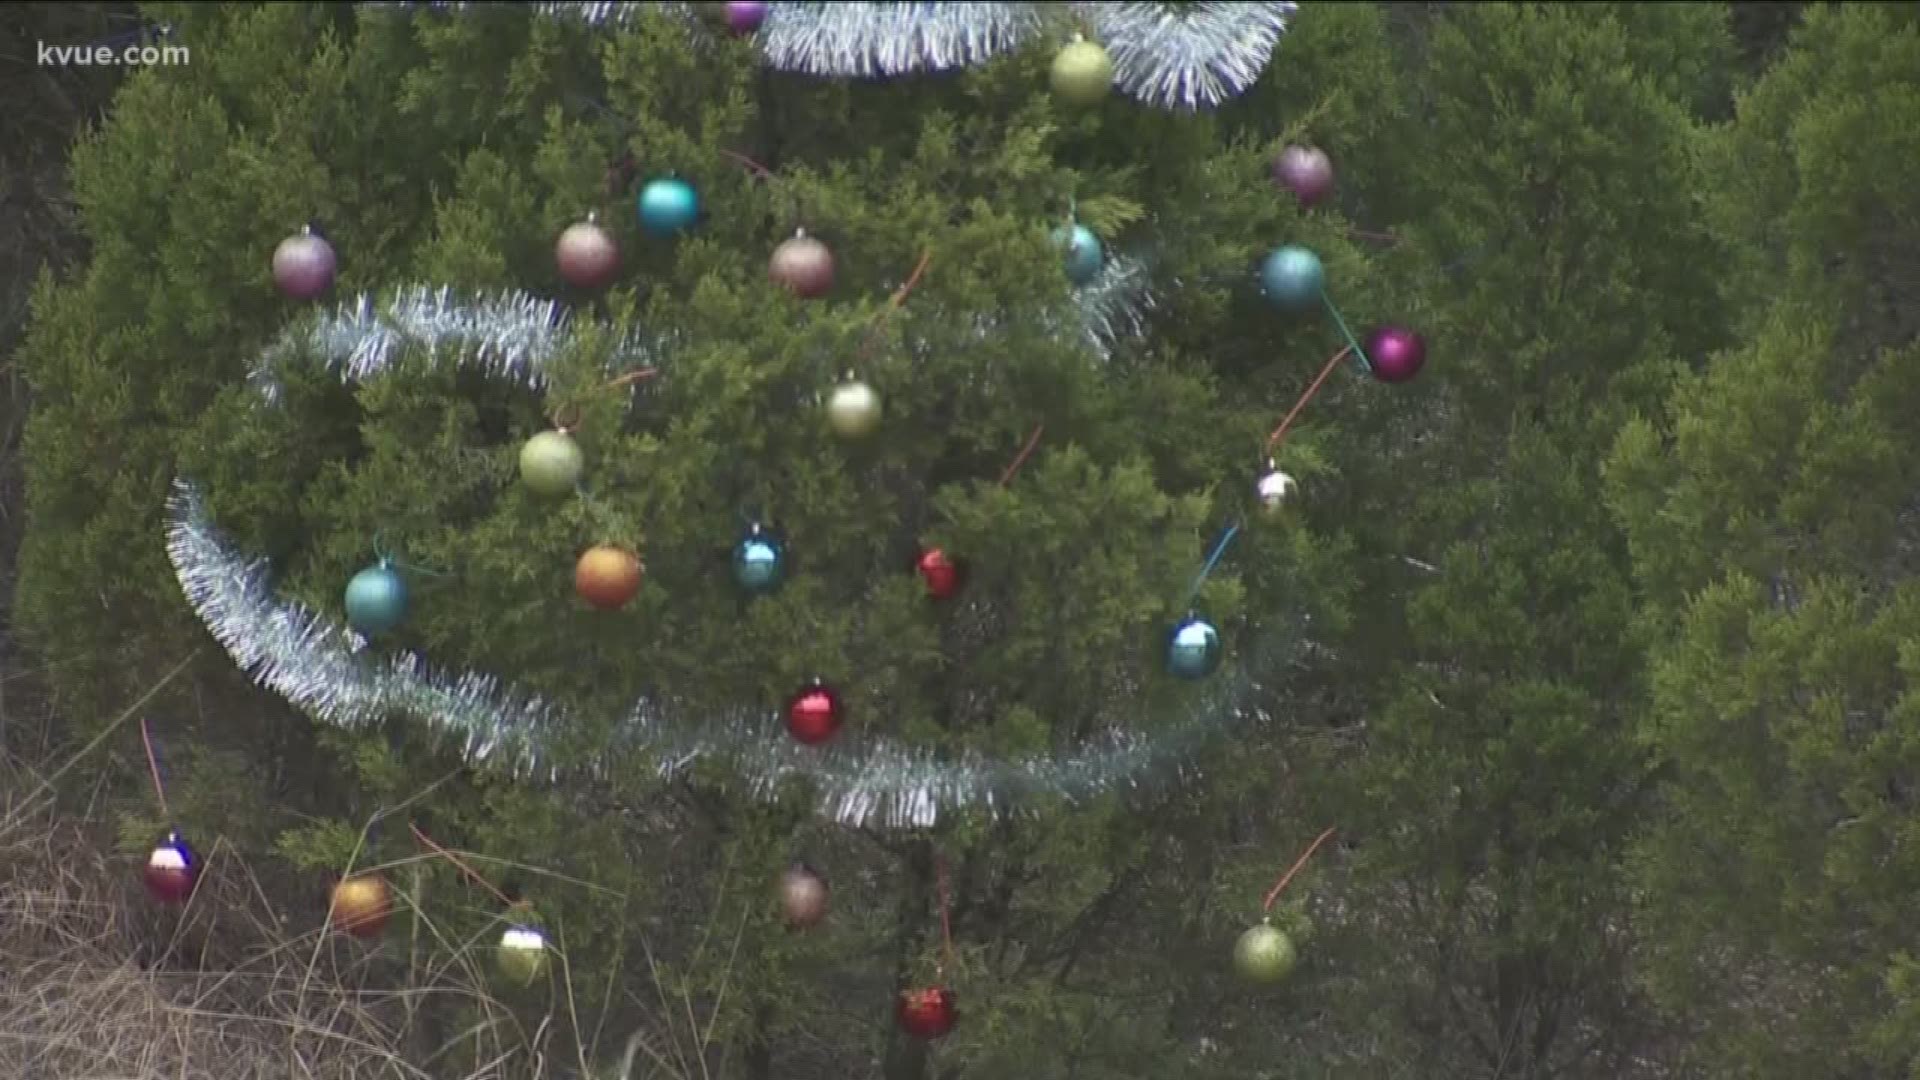 The Bull Creek Foundation (BCF) spoke out to locals in hopes of stopping an Austin tradition: putting Christmas ornaments on the juniper trees along Loop 360.